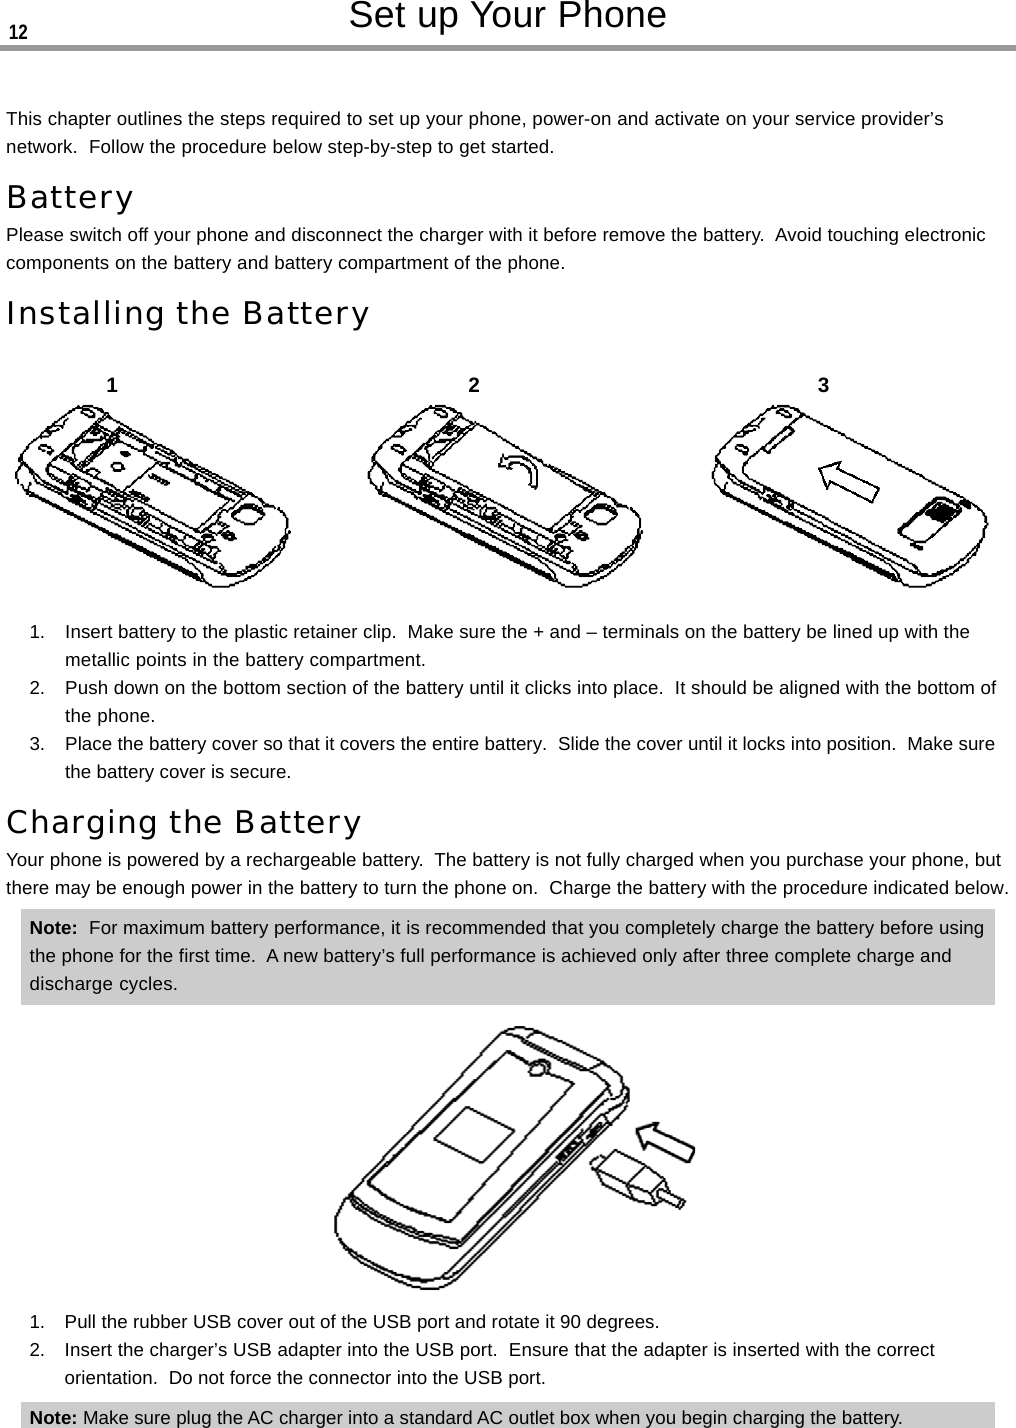 Set up Your PhoneThis chapter outlines the steps required to set up your phone, power-on and activate on your service provider’snetwork.  Follow the procedure below step-by-step to get started.BatteryPlease switch off your phone and disconnect the charger with it before remove the battery.  Avoid touching electroniccomponents on the battery and battery compartment of the phone.Installing the Battery1. Insert battery to the plastic retainer clip.  Make sure the + and – terminals on the battery be lined up with themetallic points in the battery compartment.2. Push down on the bottom section of the battery until it clicks into place.  It should be aligned with the bottom ofthe phone.3. Place the battery cover so that it covers the entire battery.  Slide the cover until it locks into position.  Make surethe battery cover is secure.Charging the BatteryYour phone is powered by a rechargeable battery.  The battery is not fully charged when you purchase your phone, butthere may be enough power in the battery to turn the phone on.  Charge the battery with the procedure indicated below.Note:  For maximum battery performance, it is recommended that you completely charge the battery before usingthe phone for the first time.  A new battery’s full performance is achieved only after three complete charge anddischarge cycles.1. Pull the rubber USB cover out of the USB port and rotate it 90 degrees.2. Insert the charger’s USB adapter into the USB port.  Ensure that the adapter is inserted with the correctorientation.  Do not force the connector into the USB port.Note: Make sure plug the AC charger into a standard AC outlet box when you begin charging the battery.12312